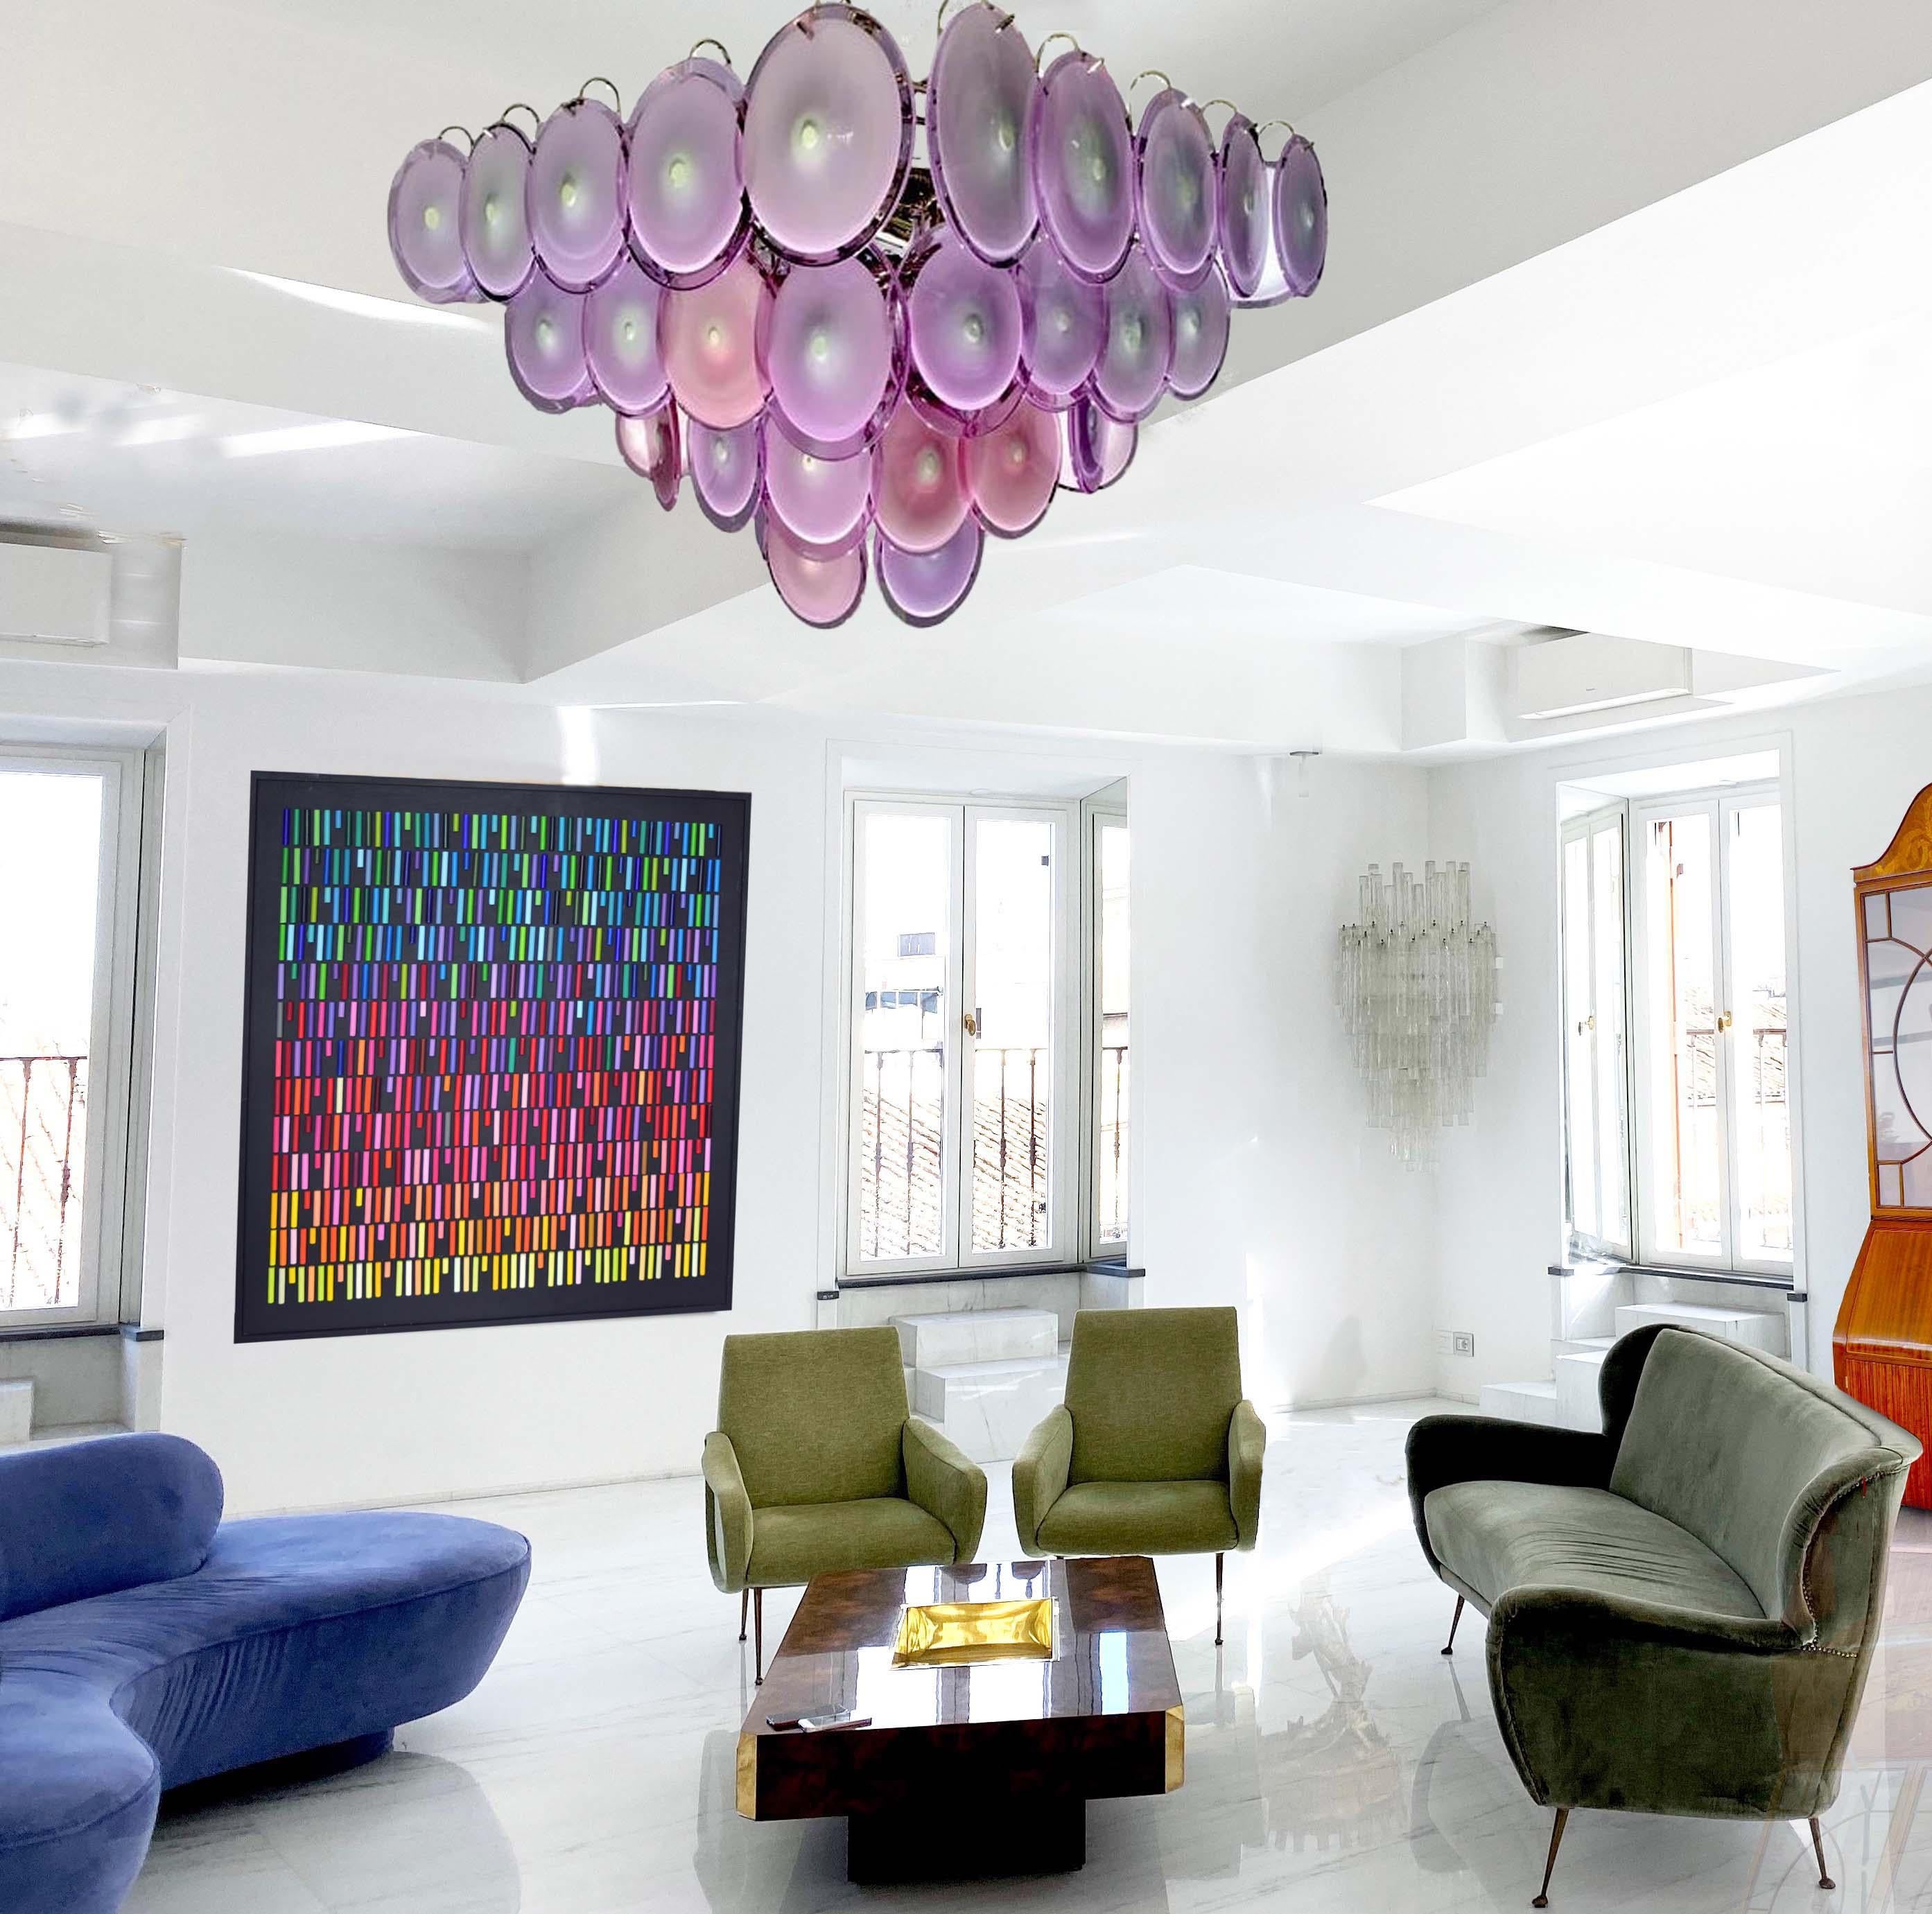 Each chandelier is made of 52 pink amethyst color discs of precious Murano glass, arranged on four levels. Nine E14 lights bulbs wired for US standards.